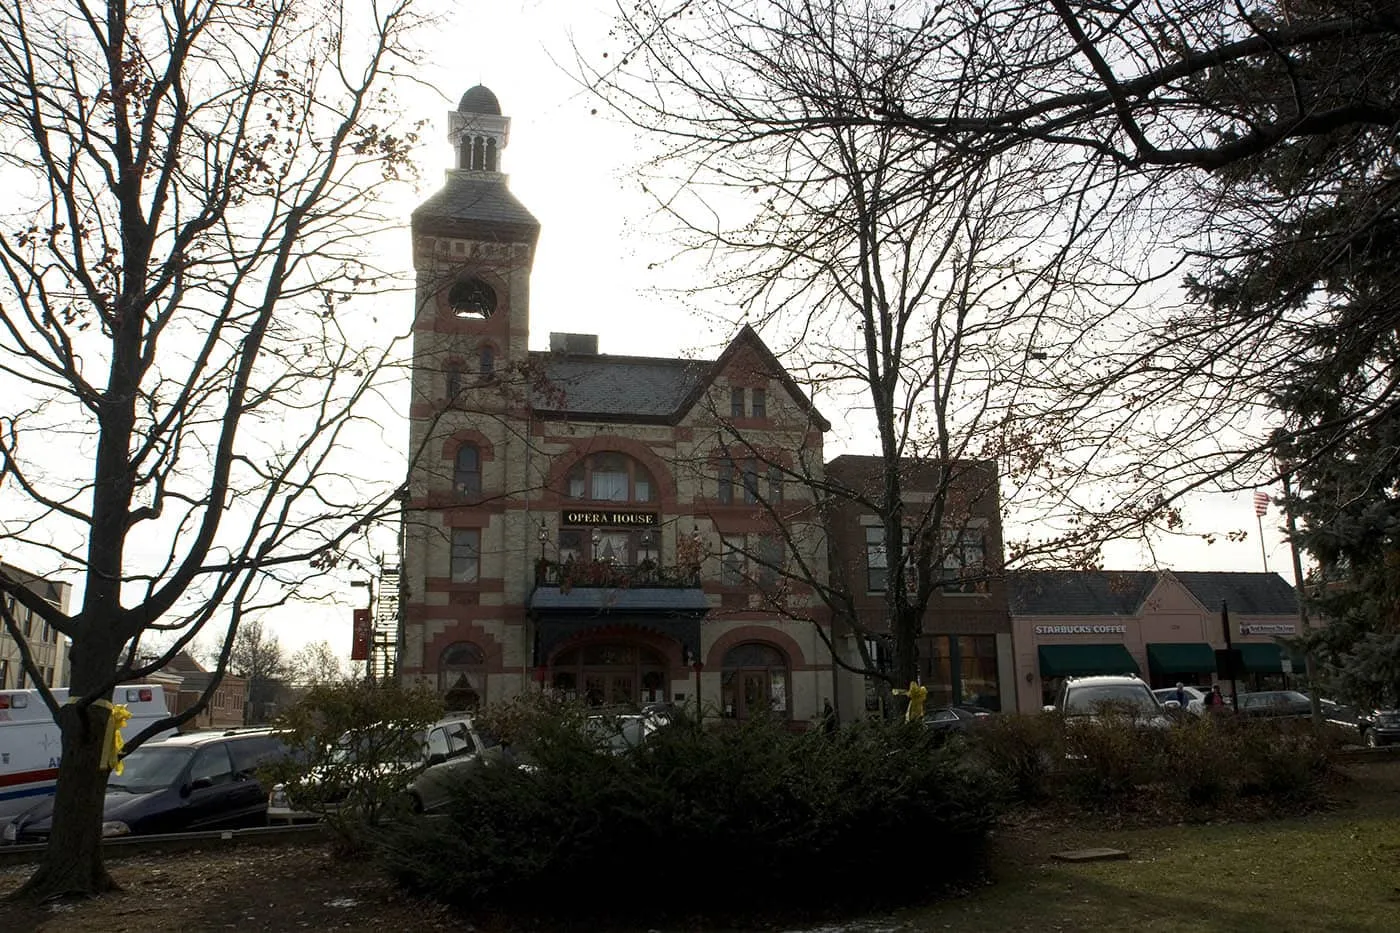 Woodstock Opera House was the The Pennsylvania Hotel - Groundhog Day Movie Filming Locations in Woodstock, Illinois